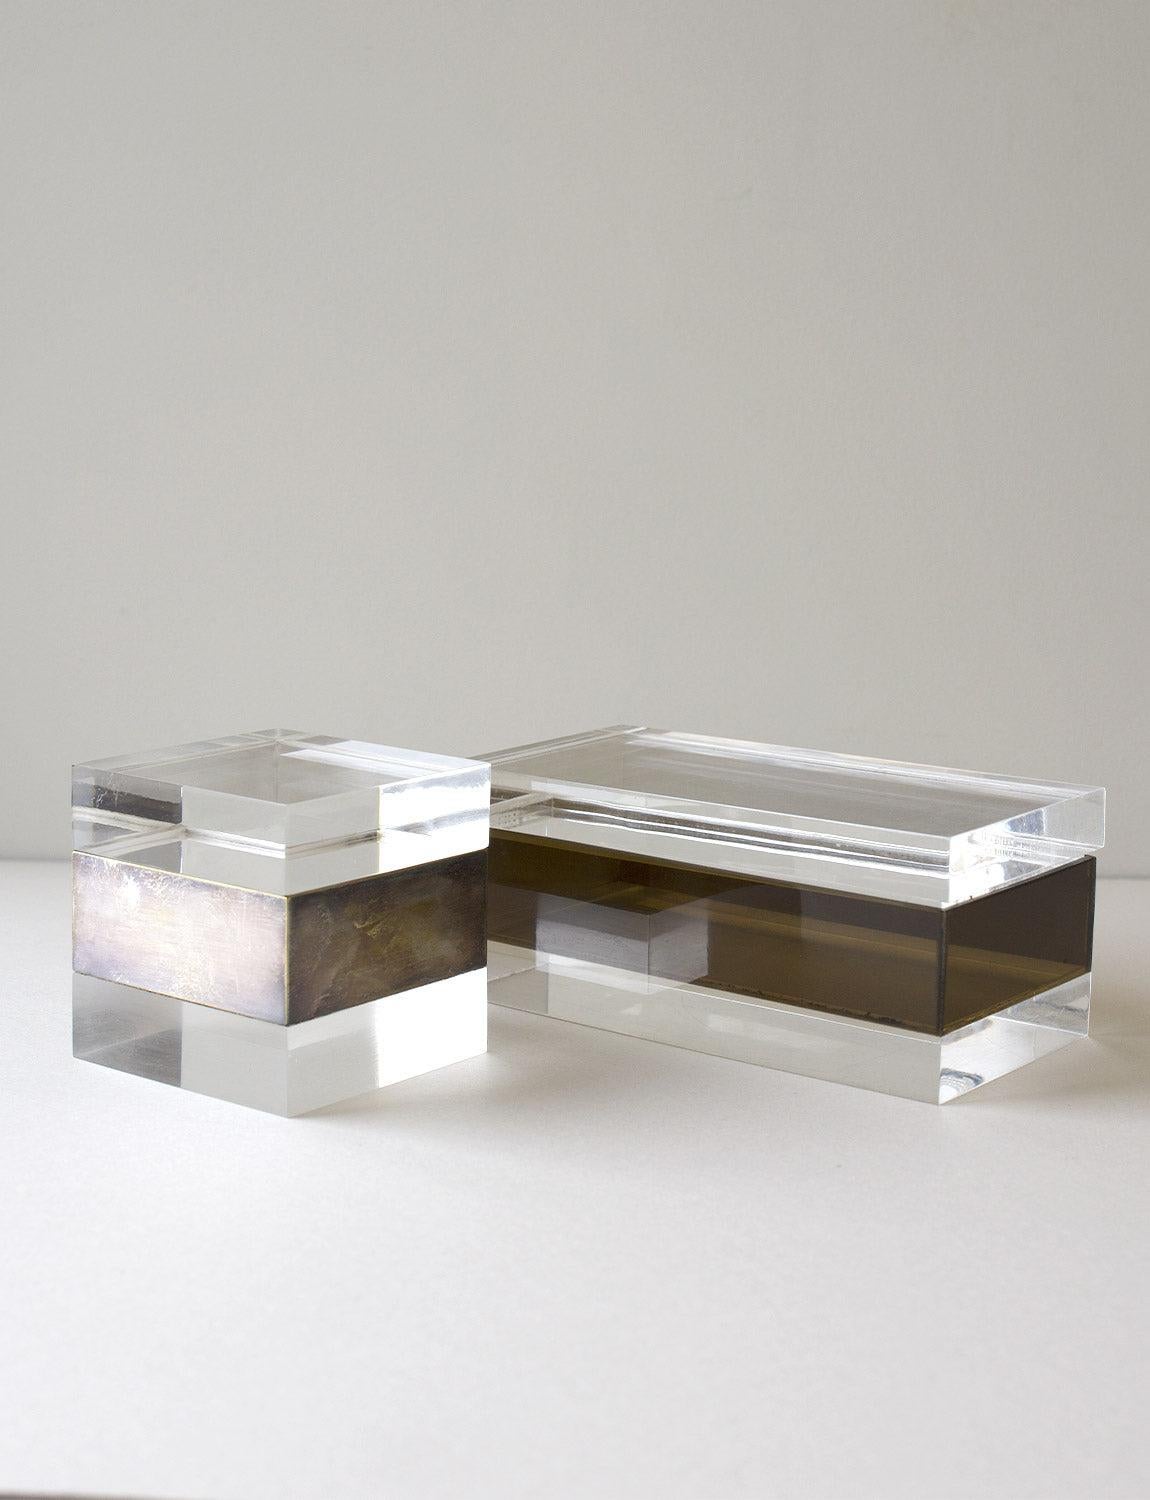 Two Italian 1960s/70s plexiglass ornament boxes attributed to Gabriella Crespi the Italian designer. The rectangular box has a thick perspex brown brand and the cube shaped box has a metal band. The pair look extremely chic on a desk or coffee